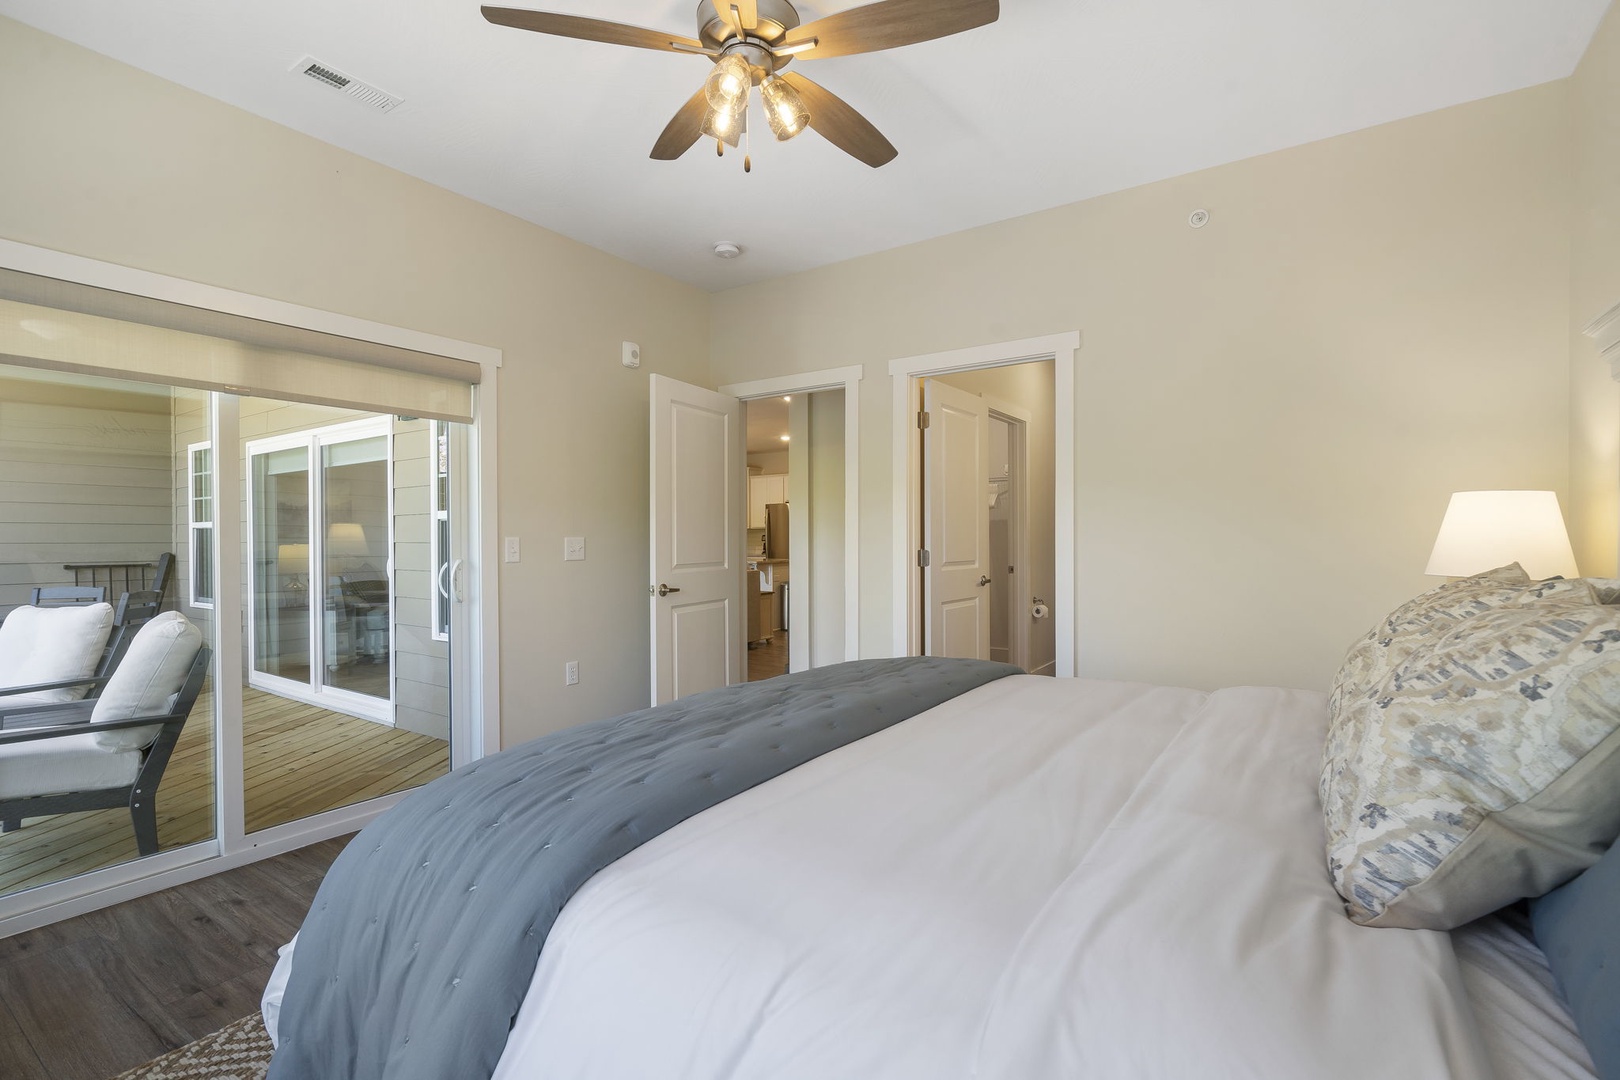 The Master Bedroom offers a King Bed, TV, En Suite Bathroom, and stunning lake views